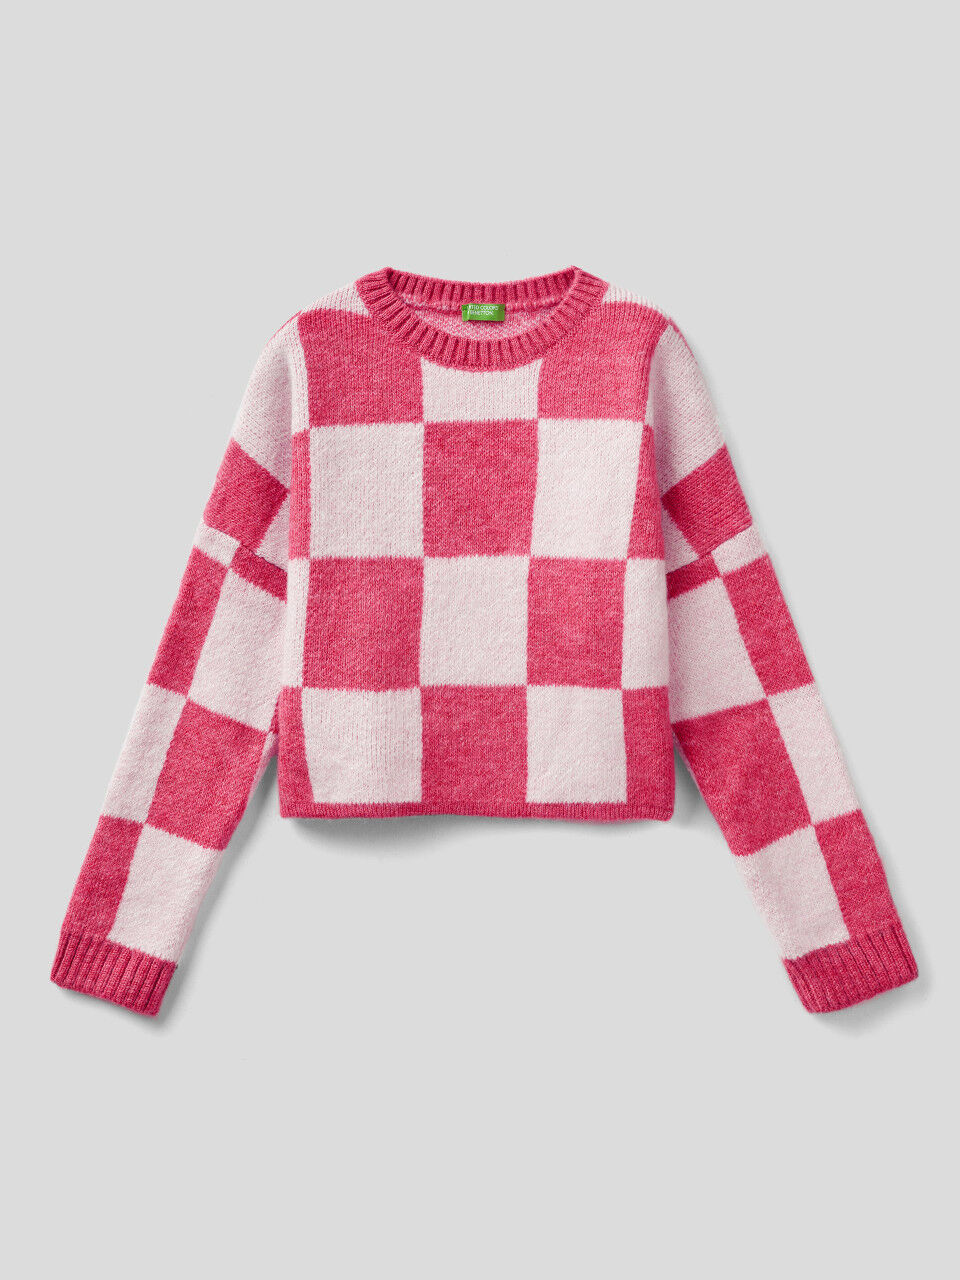 Two-tone check sweater